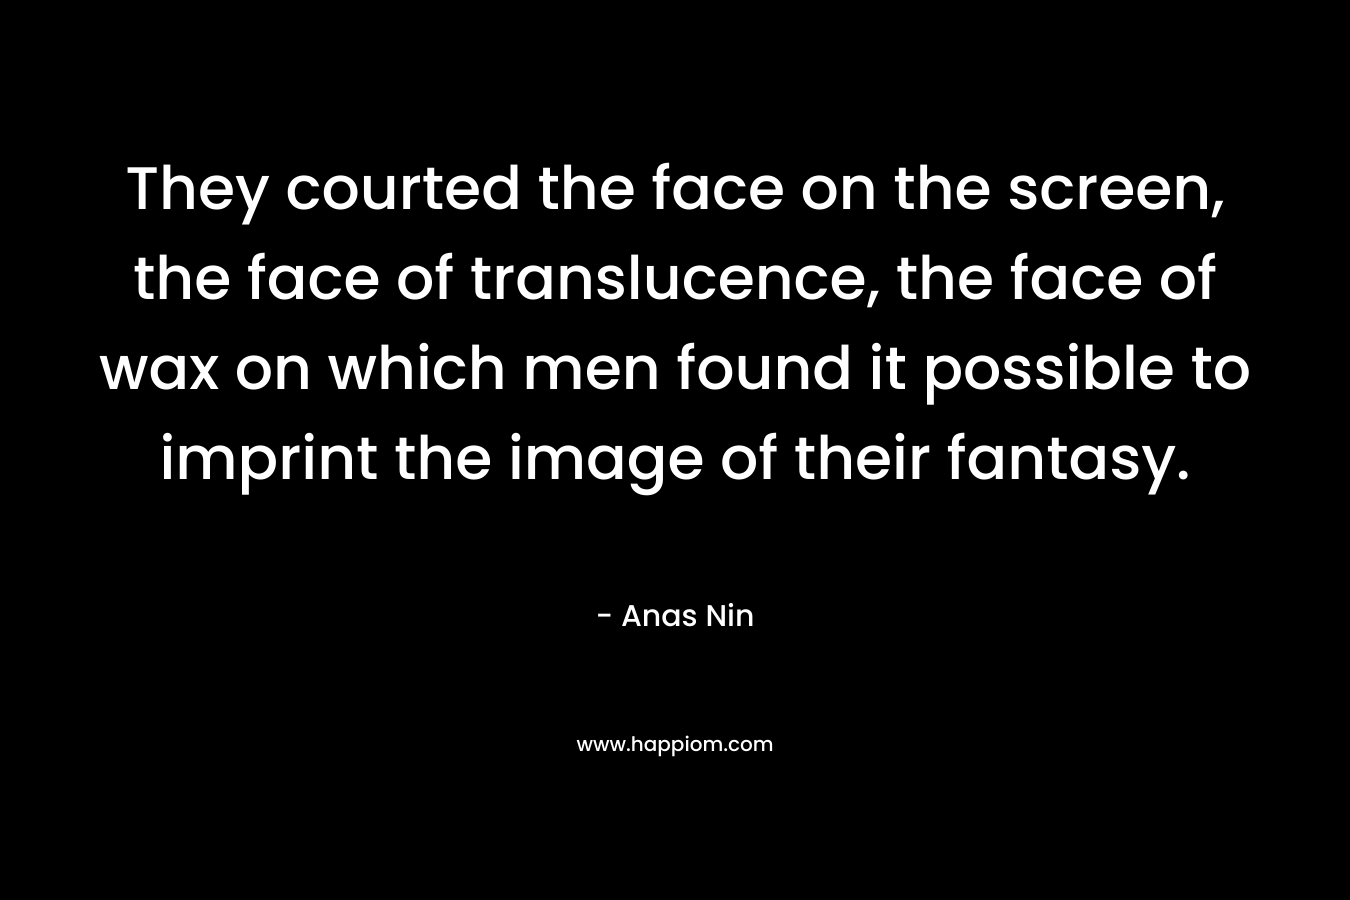 They courted the face on the screen, the face of translucence, the face of wax on which men found it possible to imprint the image of their fantasy.